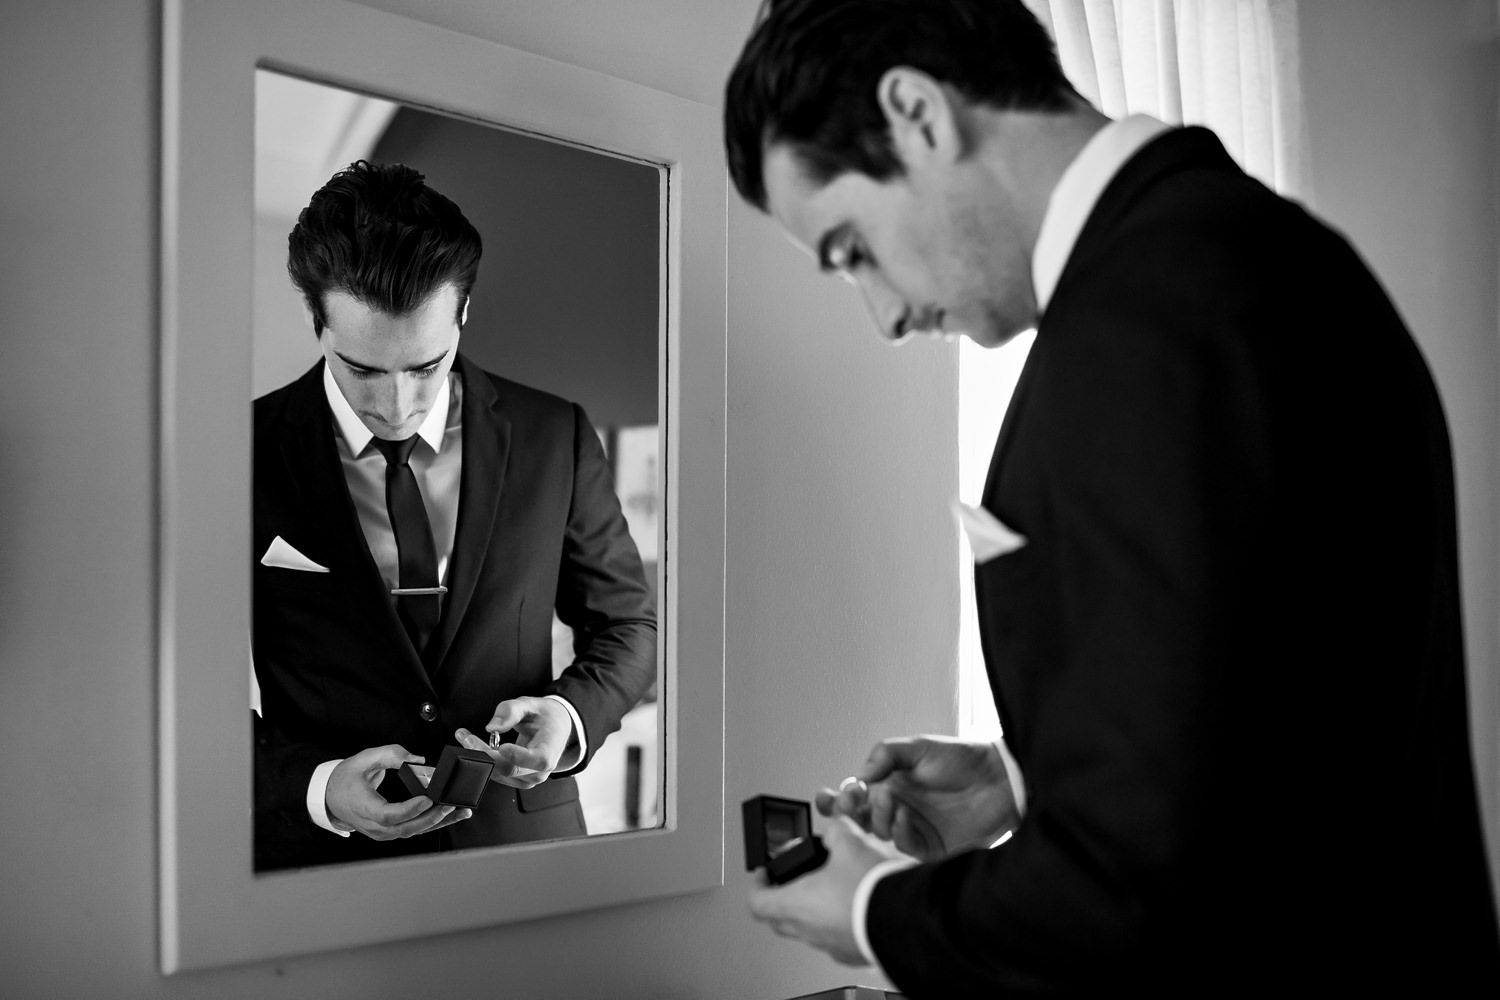 The groom with white pocket square is reflected in a mirror as he does final checks on the wedding rings at The Plantation, a symbol of dedication and a celebration of love